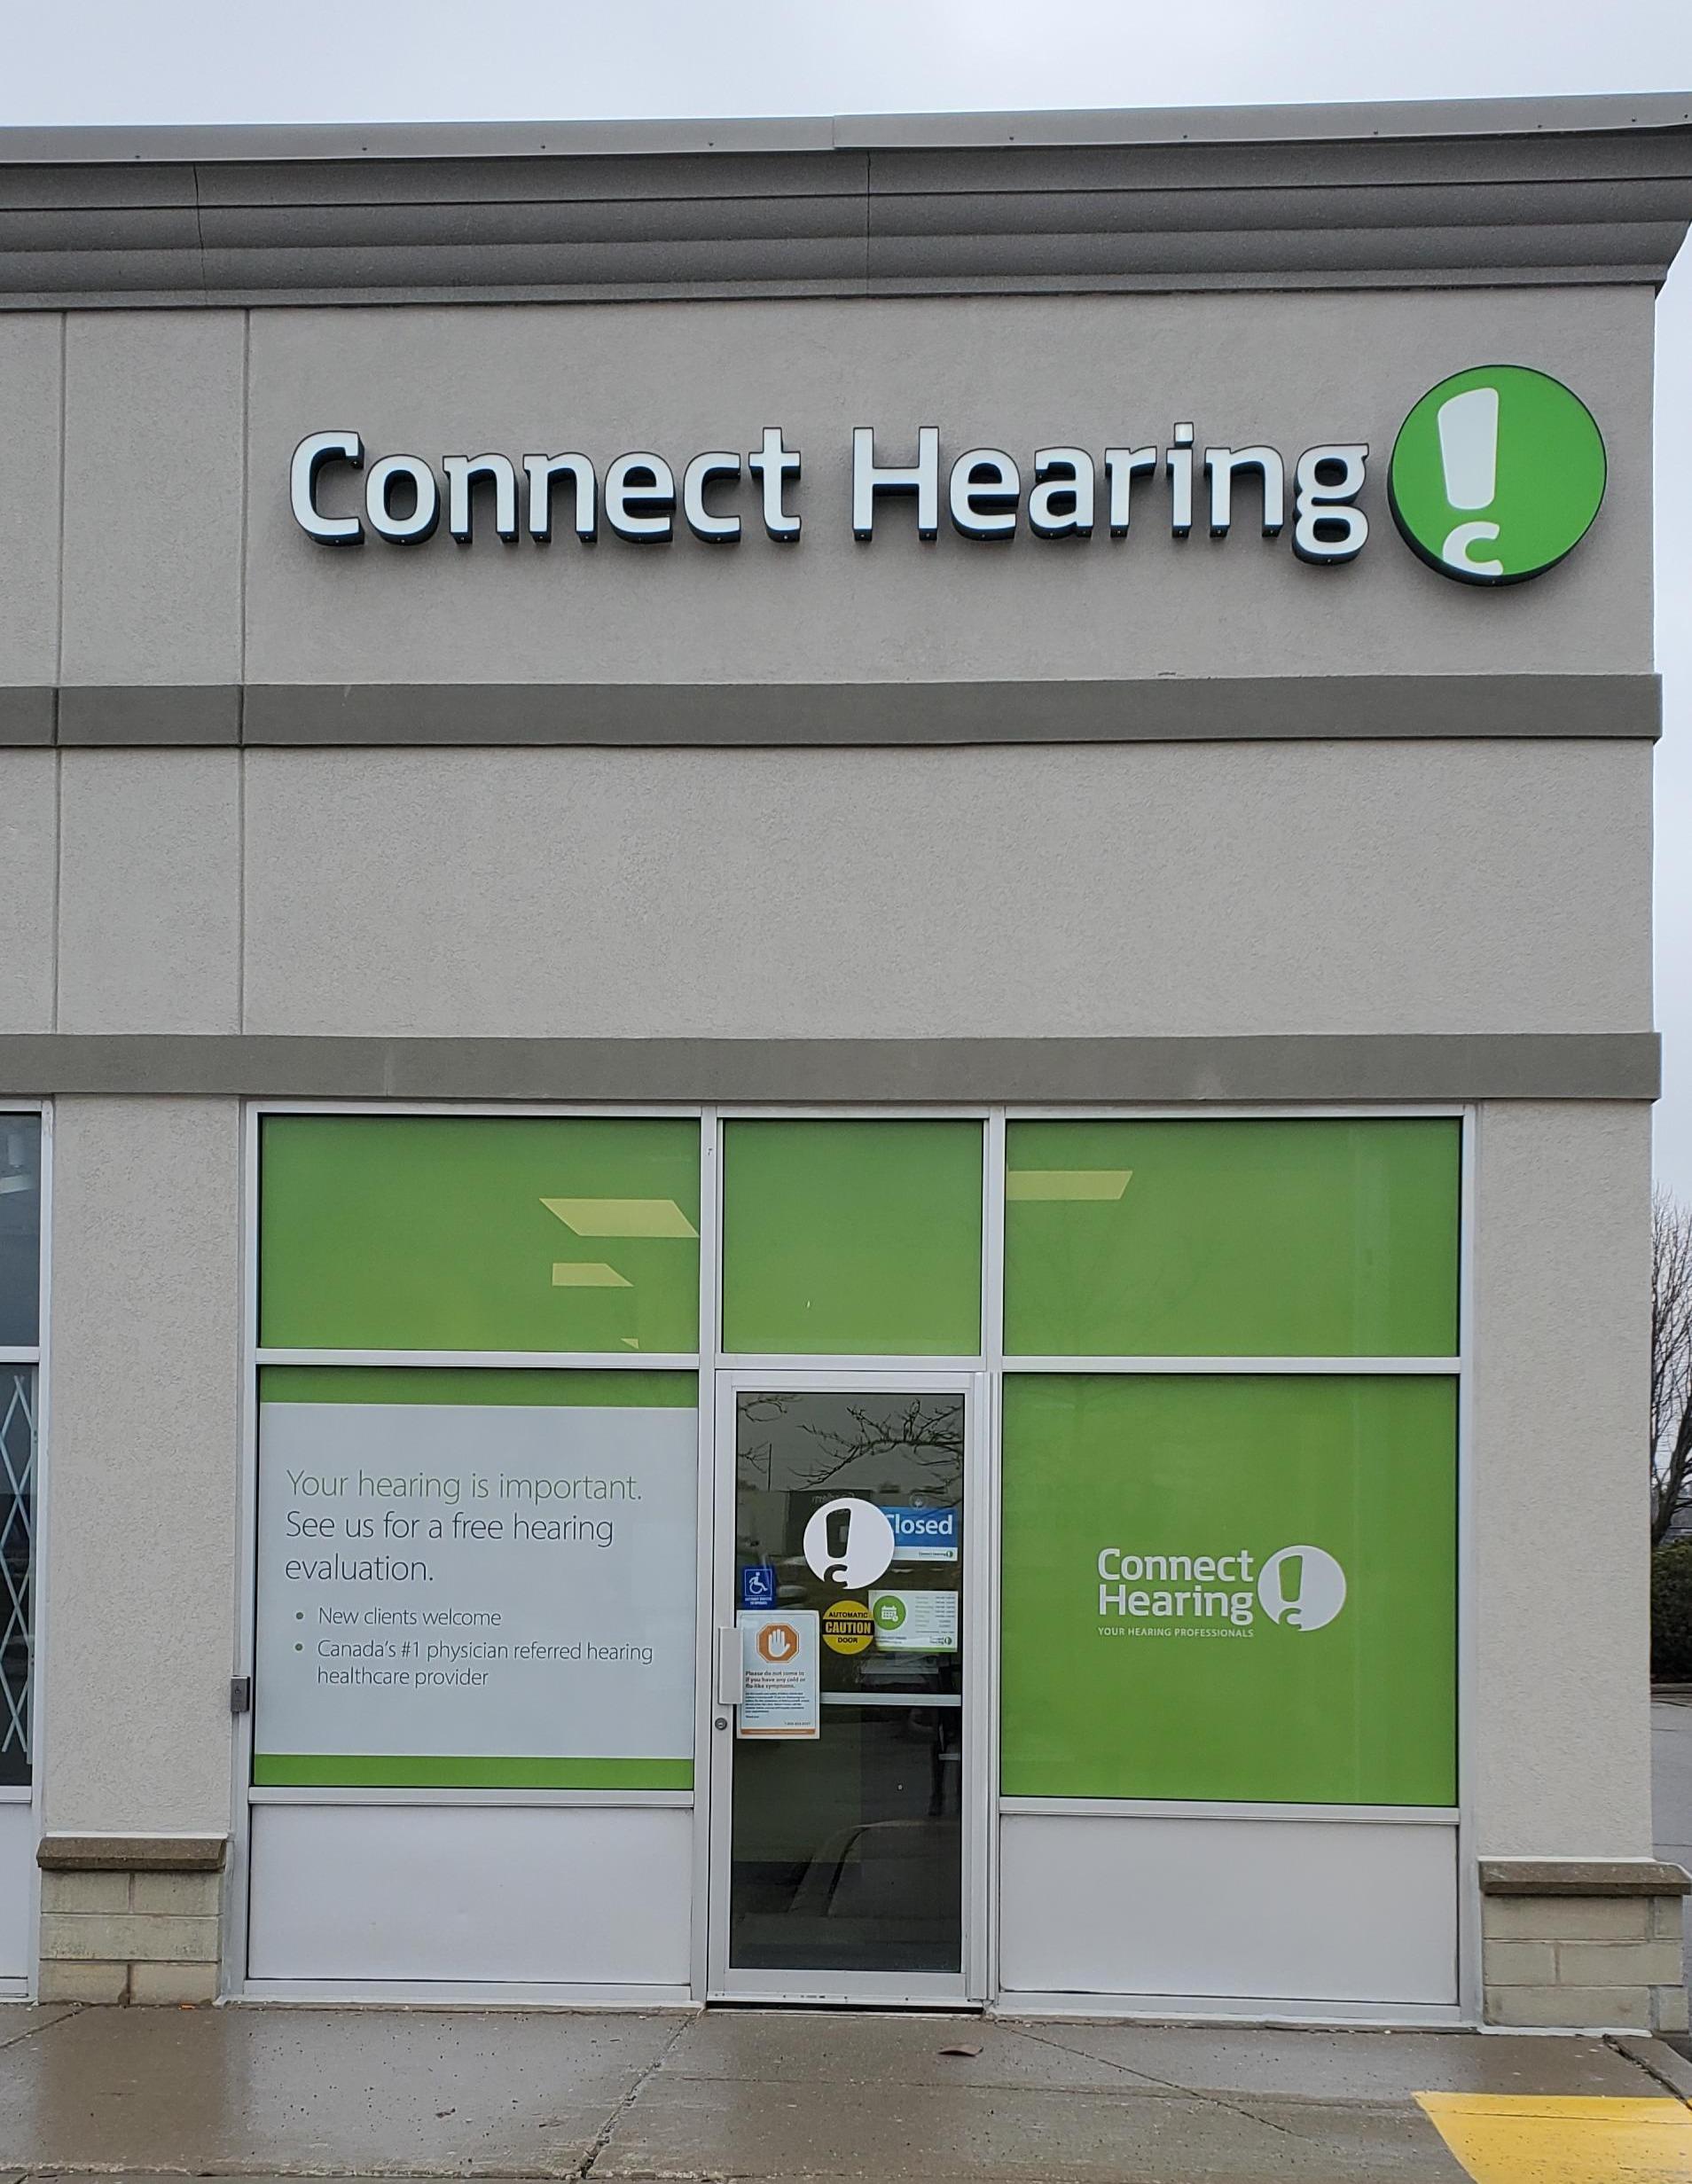 Connect Hearing Strathroy (519)205-2007